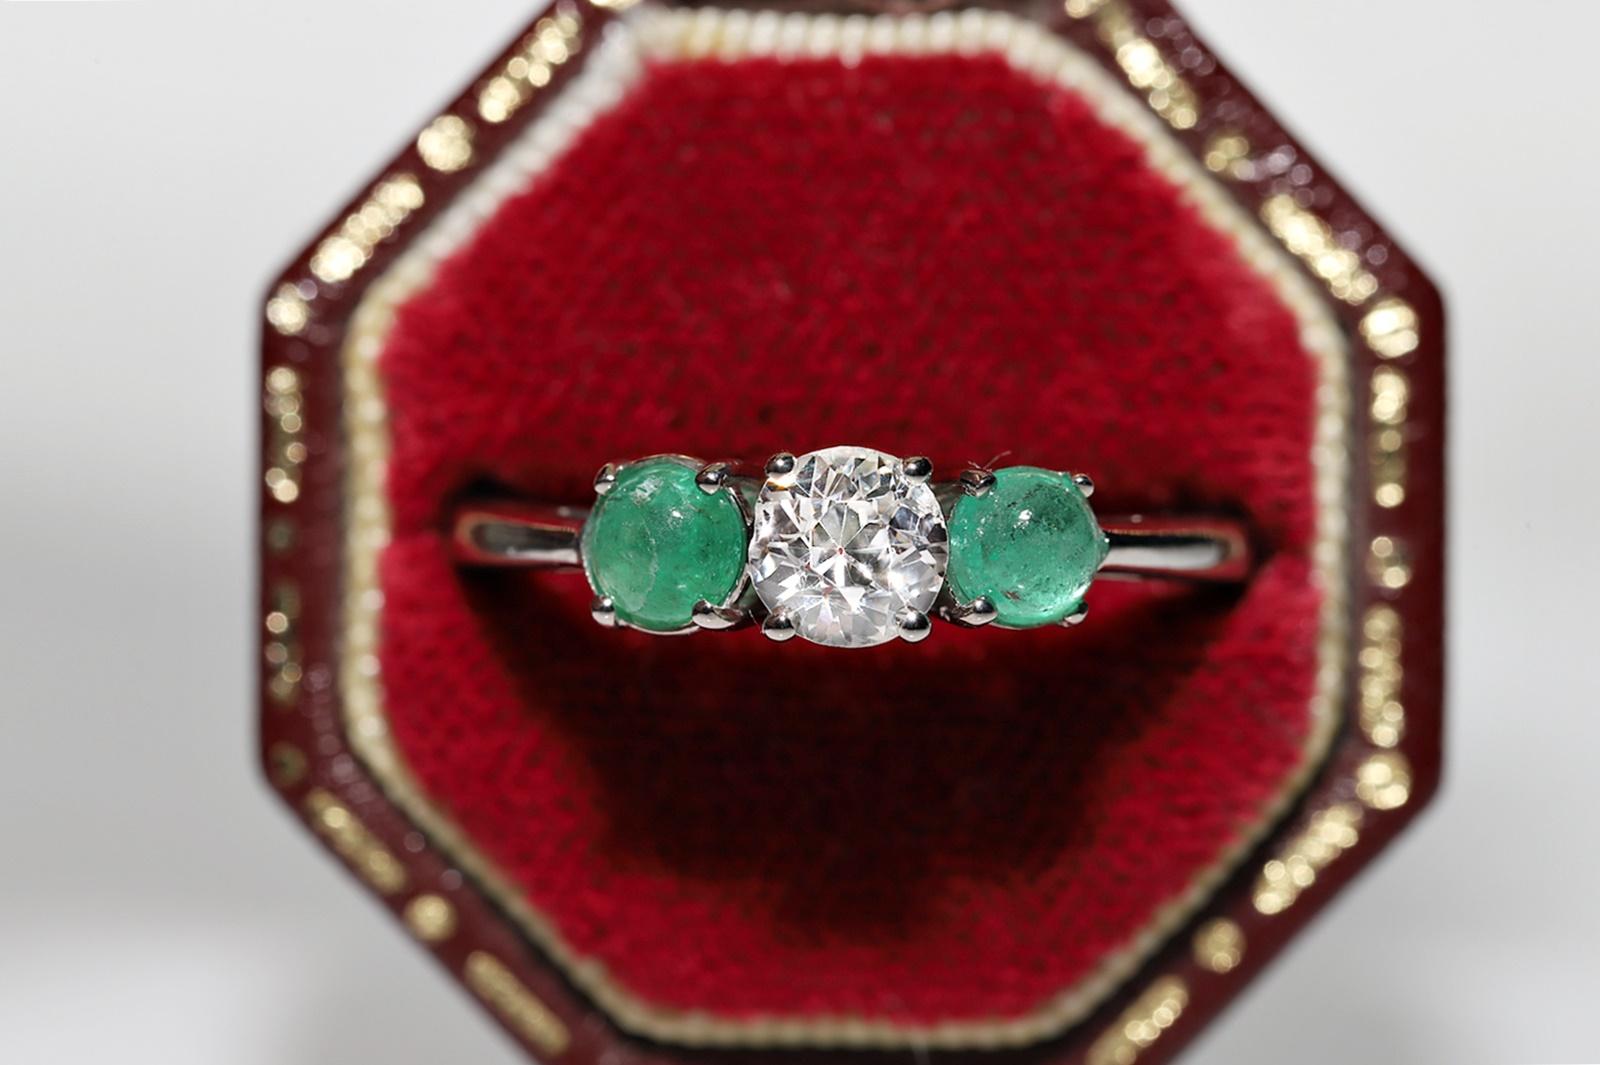 In very good condition.
Total weight is 2.9 grams.
Totally is diamond 0.40 ct.
The diamond is has G color and Pique 1 clarity.
Totally is emerald 0.42 ct.
Ring size is US 7 (We offer free resizing)
We can make any size.
Box is not included.
Please